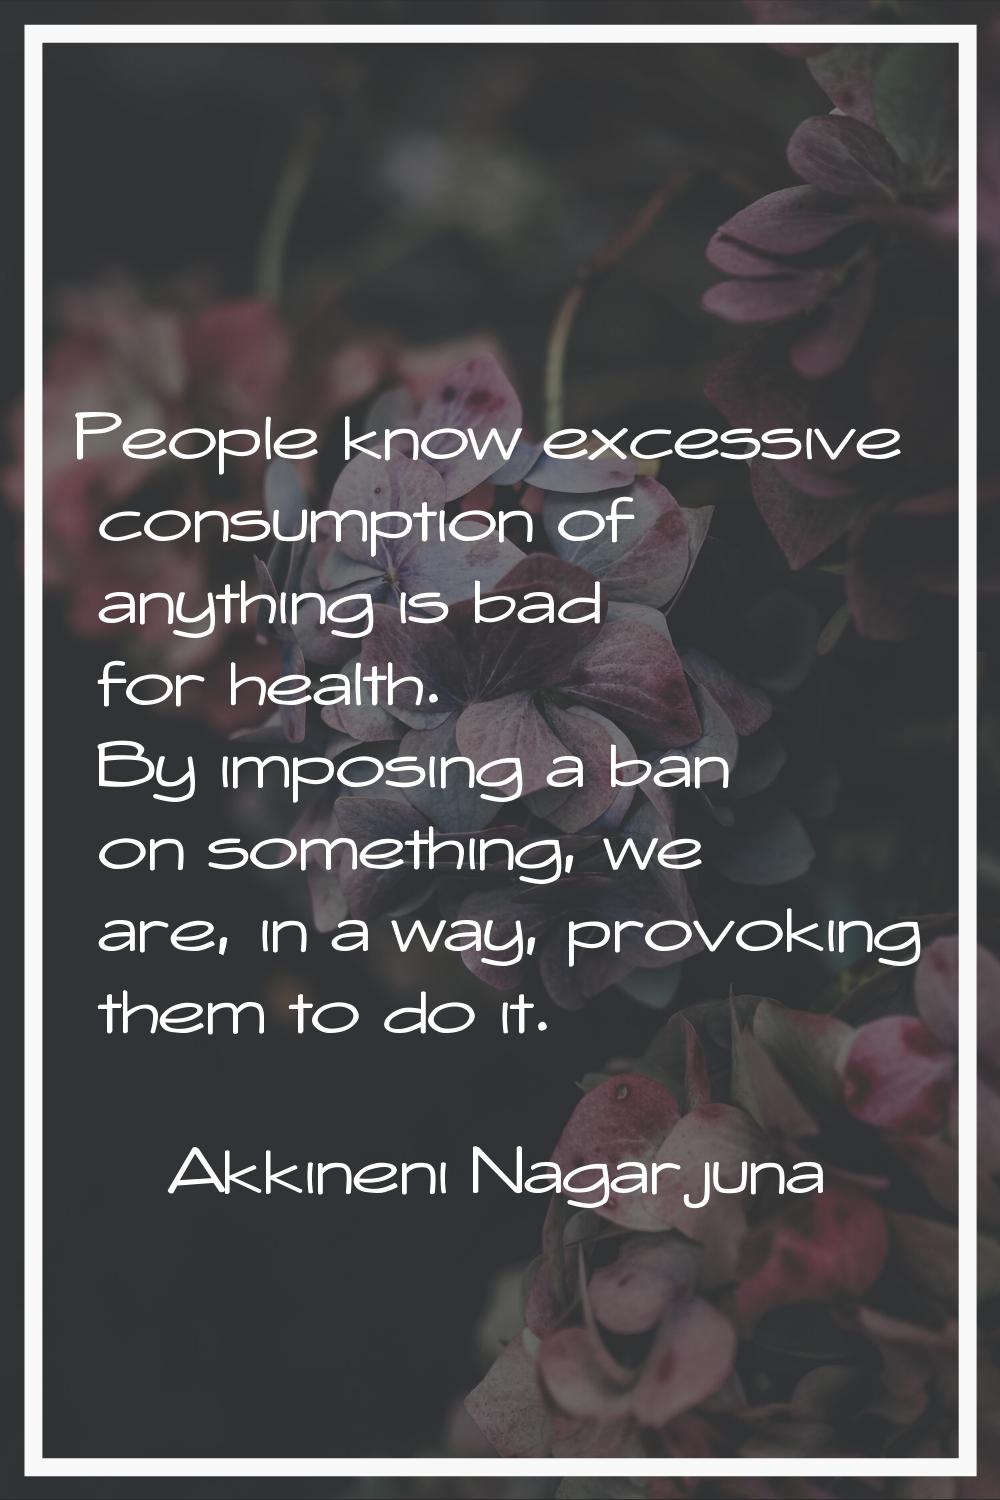 People know excessive consumption of anything is bad for health. By imposing a ban on something, we